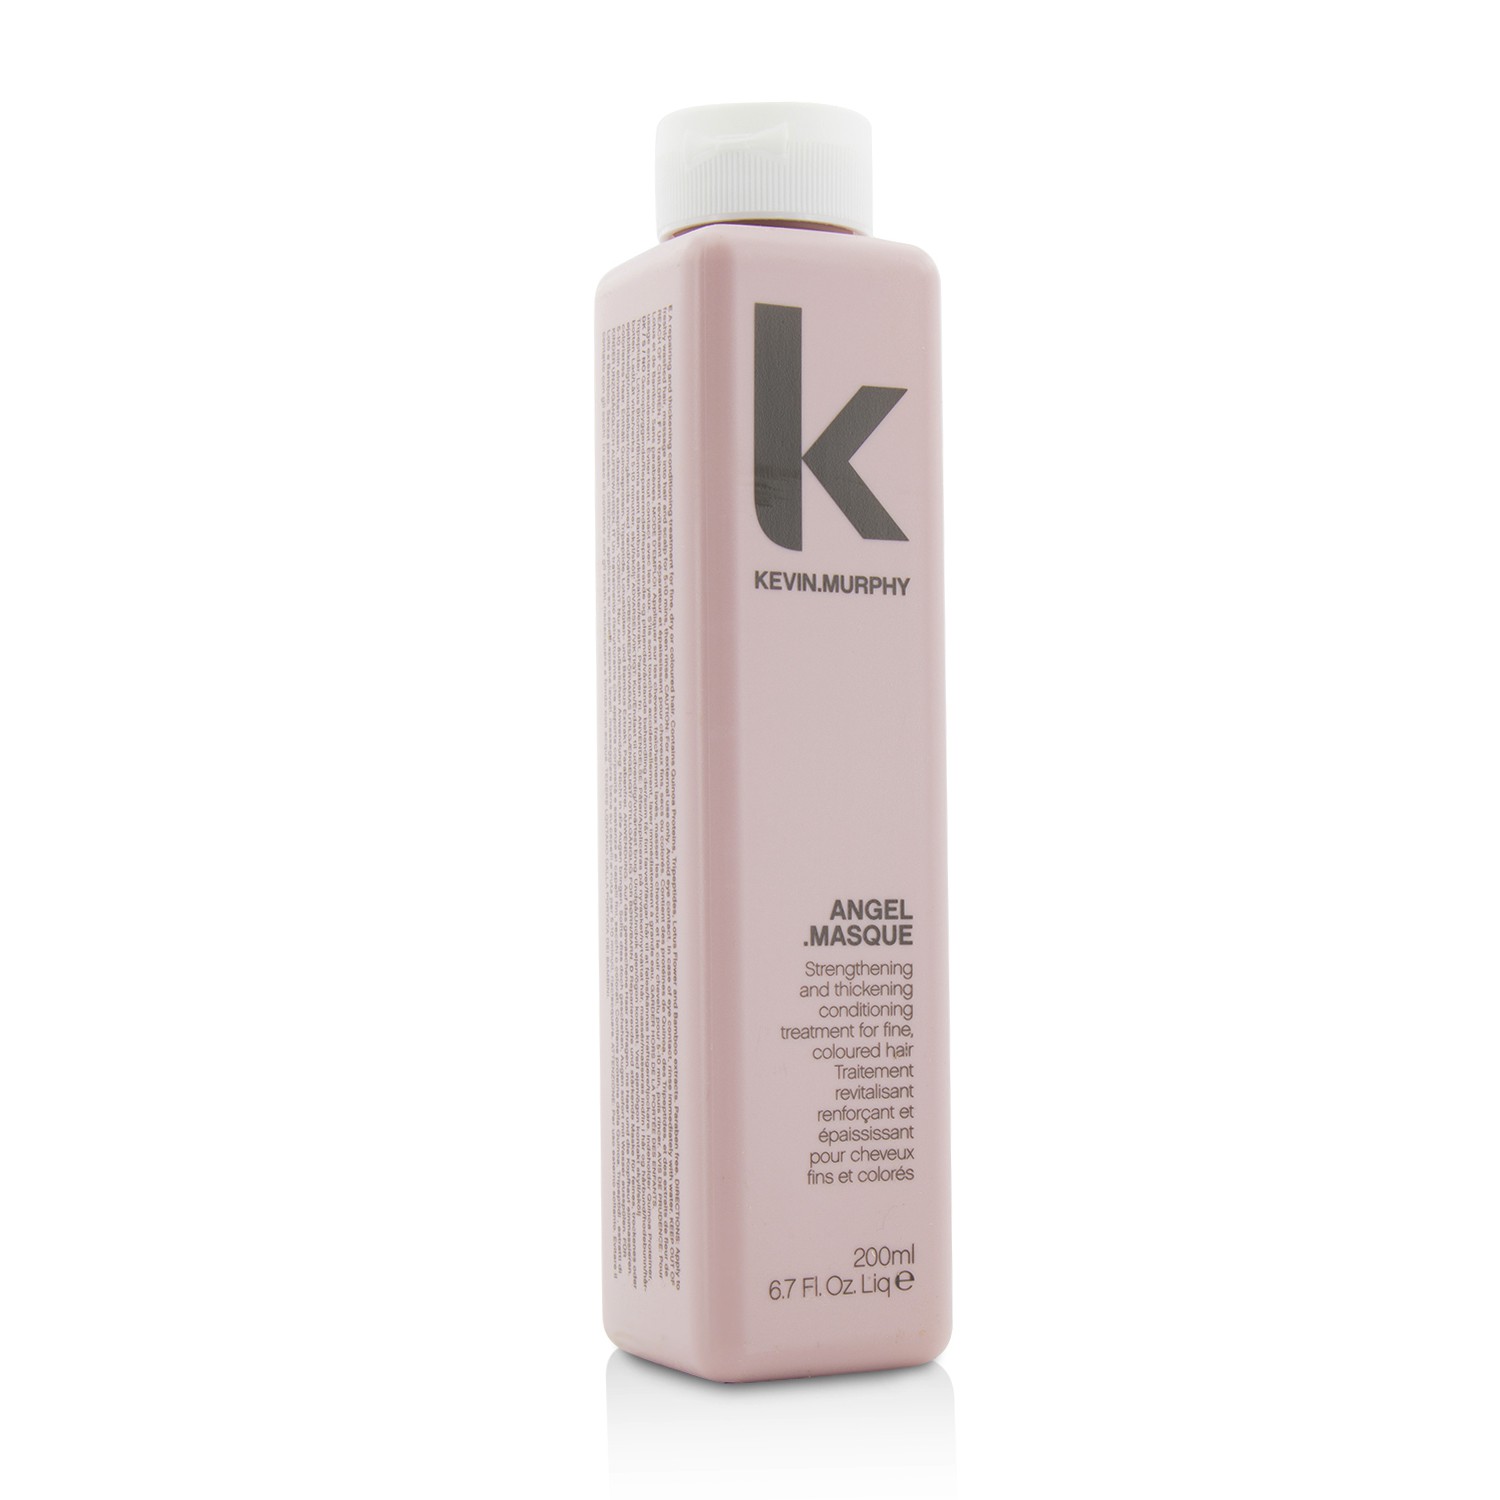 Angel.Masque (Strenghening and Thickening Conditioning Treatment - For Fine Coloured Hair) Kevin.Murphy Image